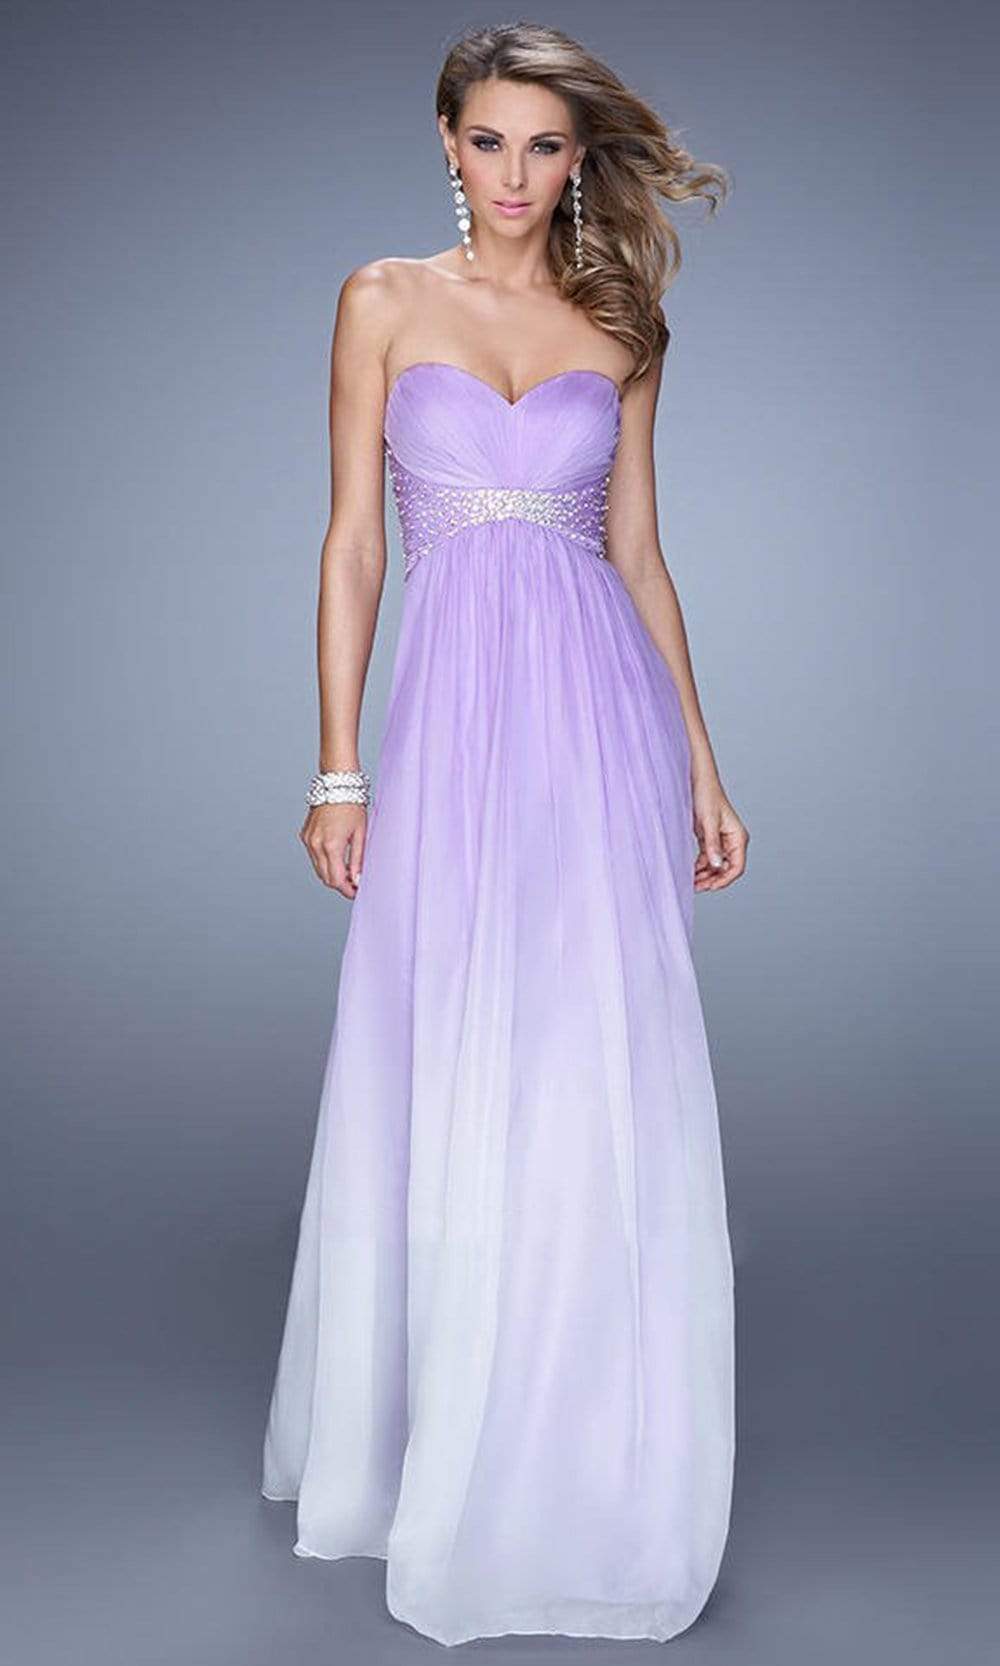 La Femme - Ruched Sweetheart Ombre Chiffon Dress 20885SC - 1 pc Wisteria In Size 0 Available CCSALE 0 / Wisteria